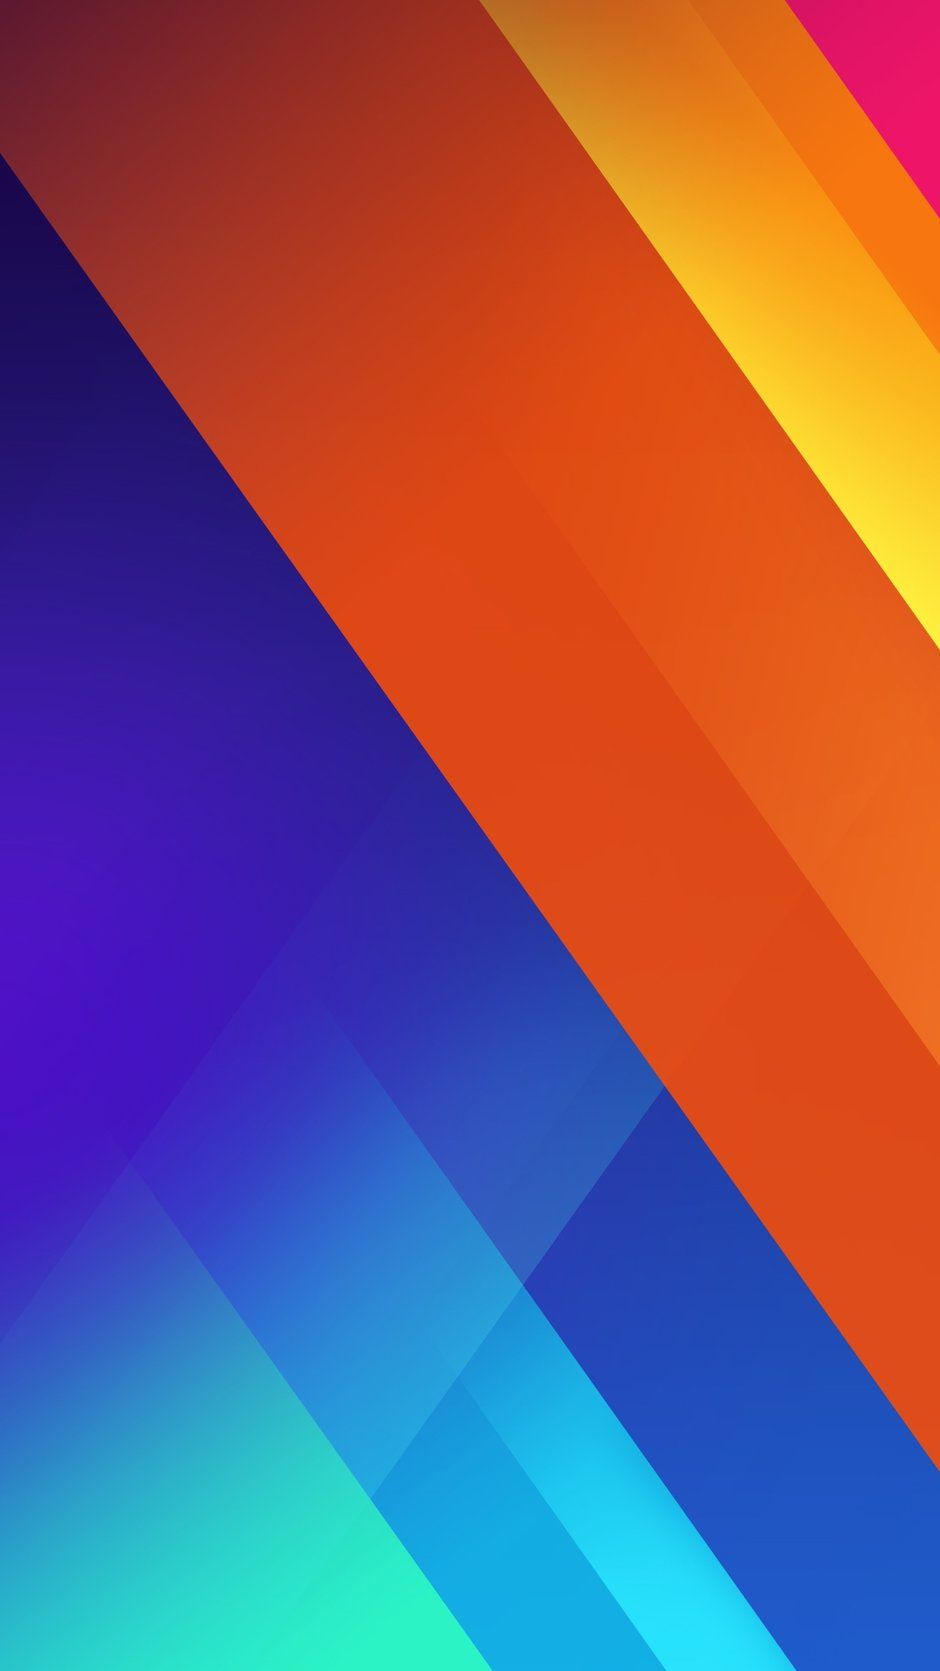 Meizu MX5 wallpaper available for download